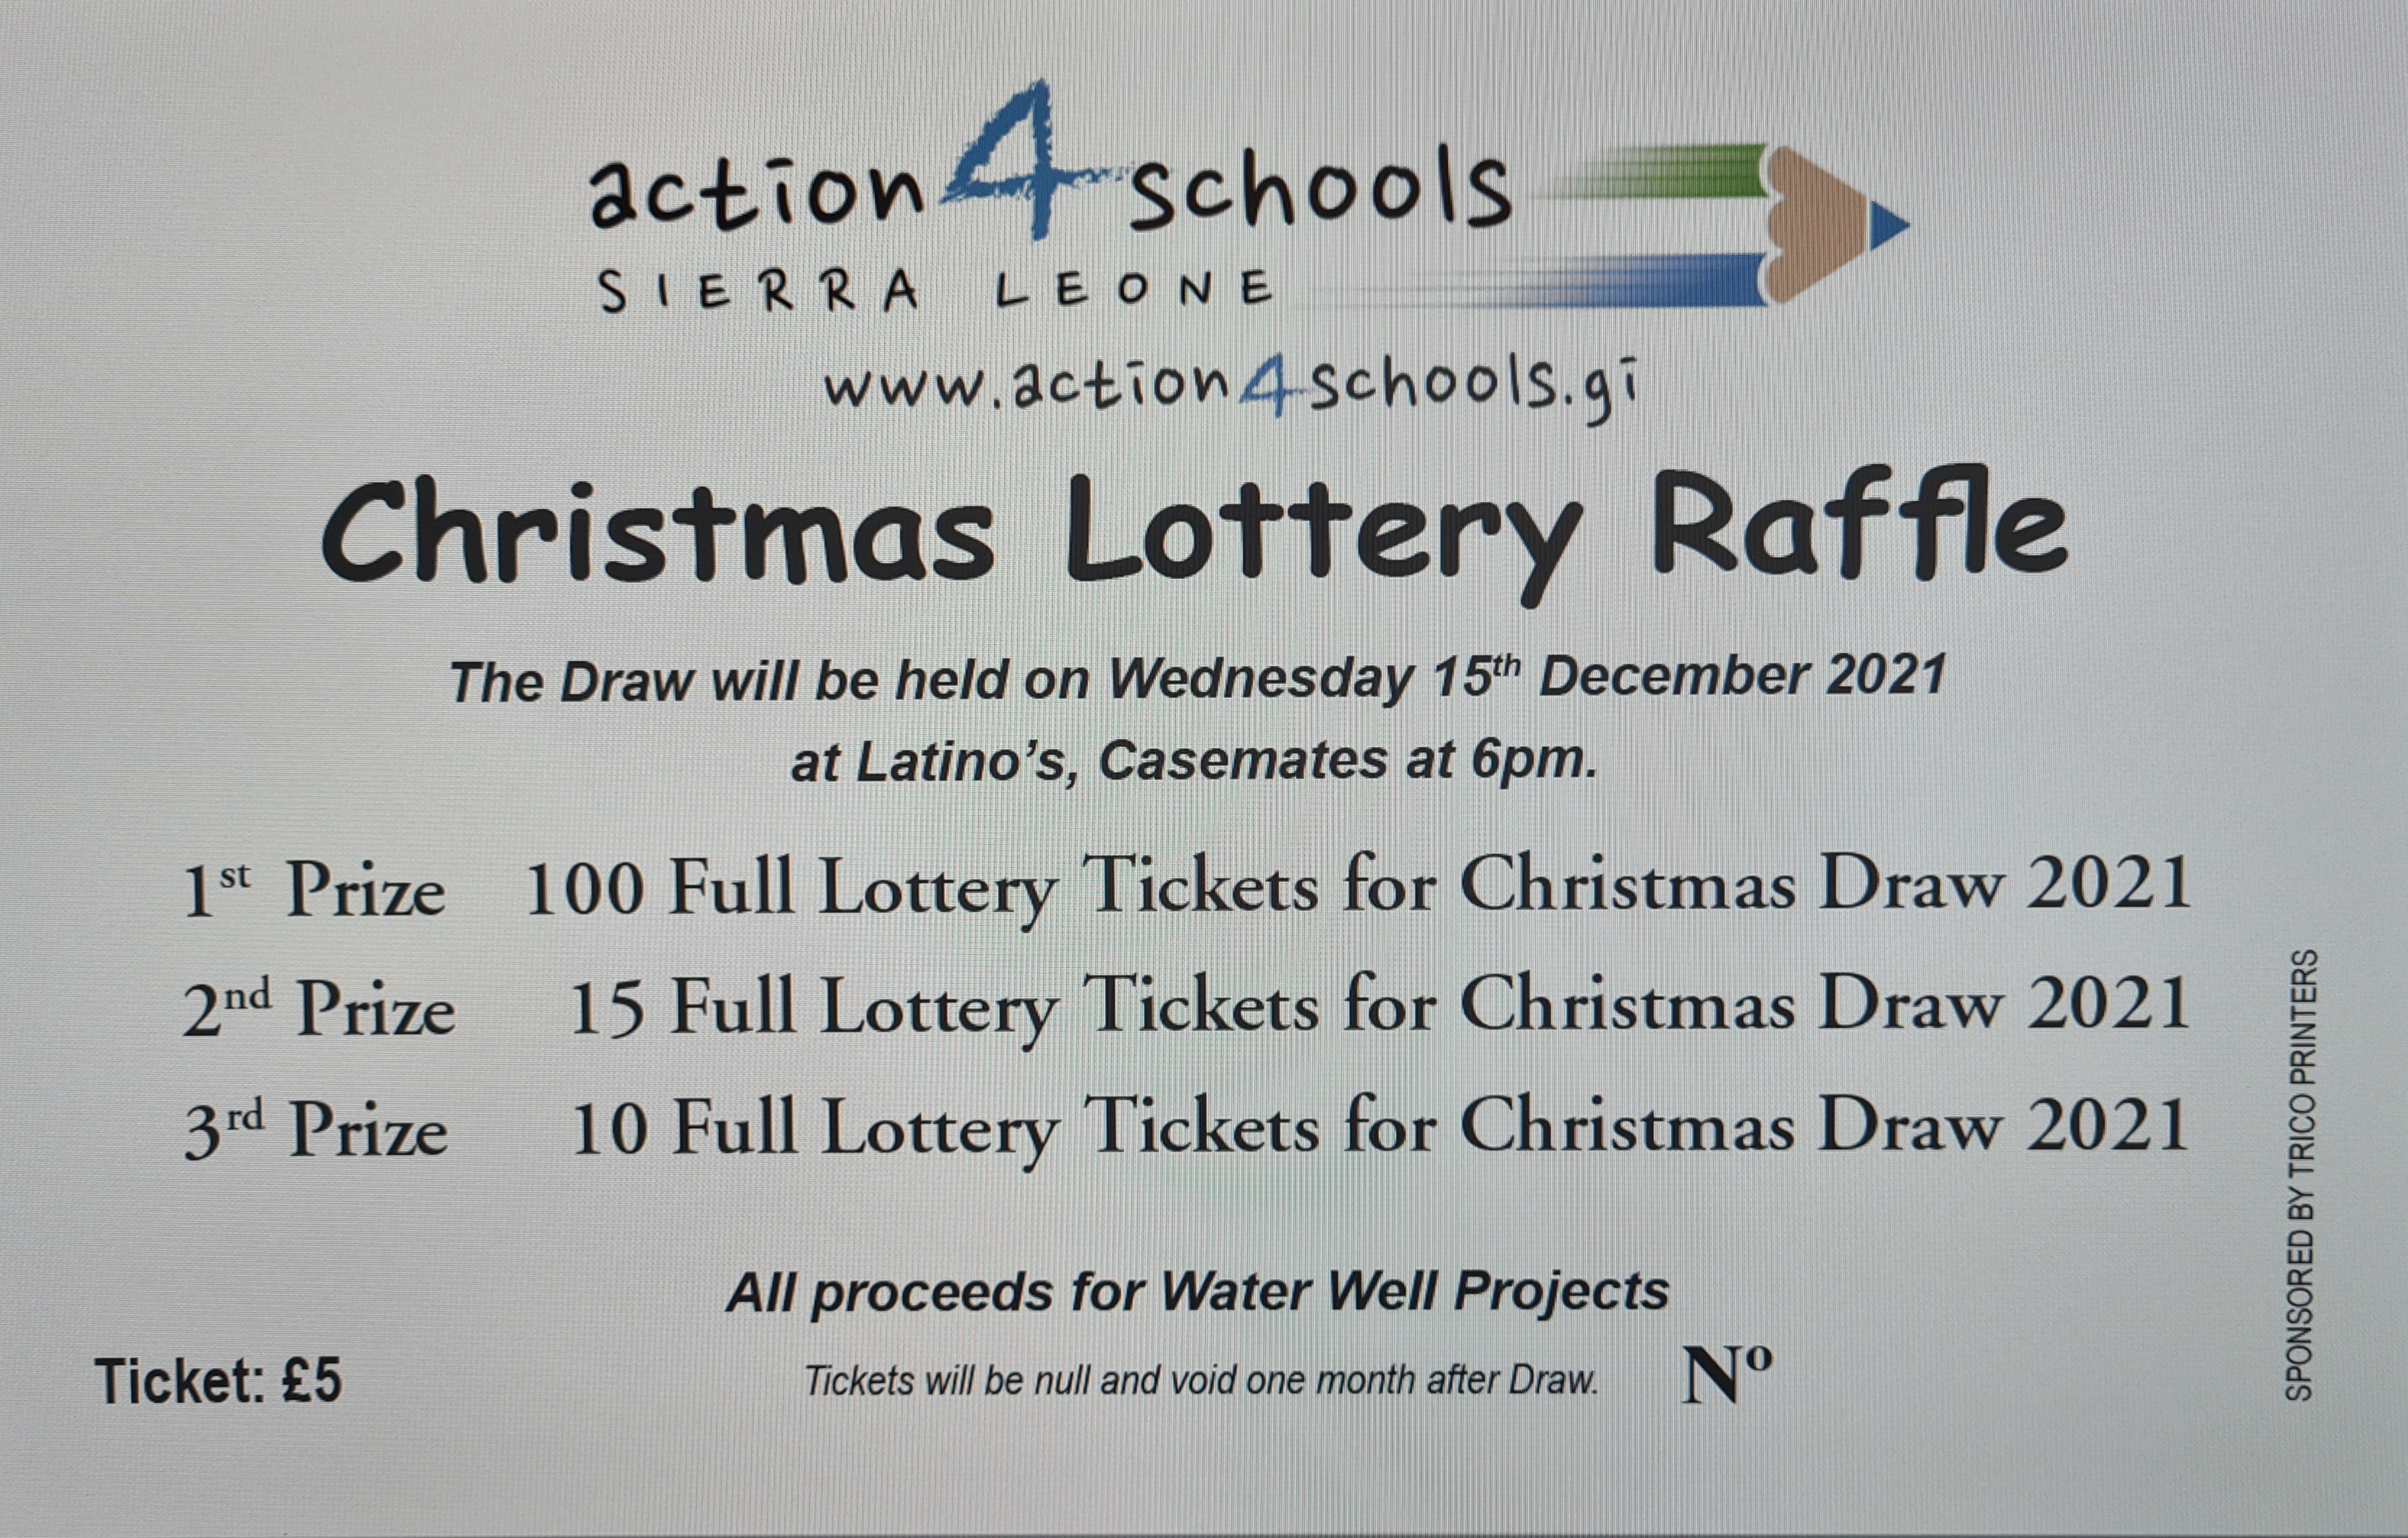 £5 a ticket and you could win £2,000 of lottery tickets for the £1m Christmas lottery draw and all proceeds are for our water well projects !